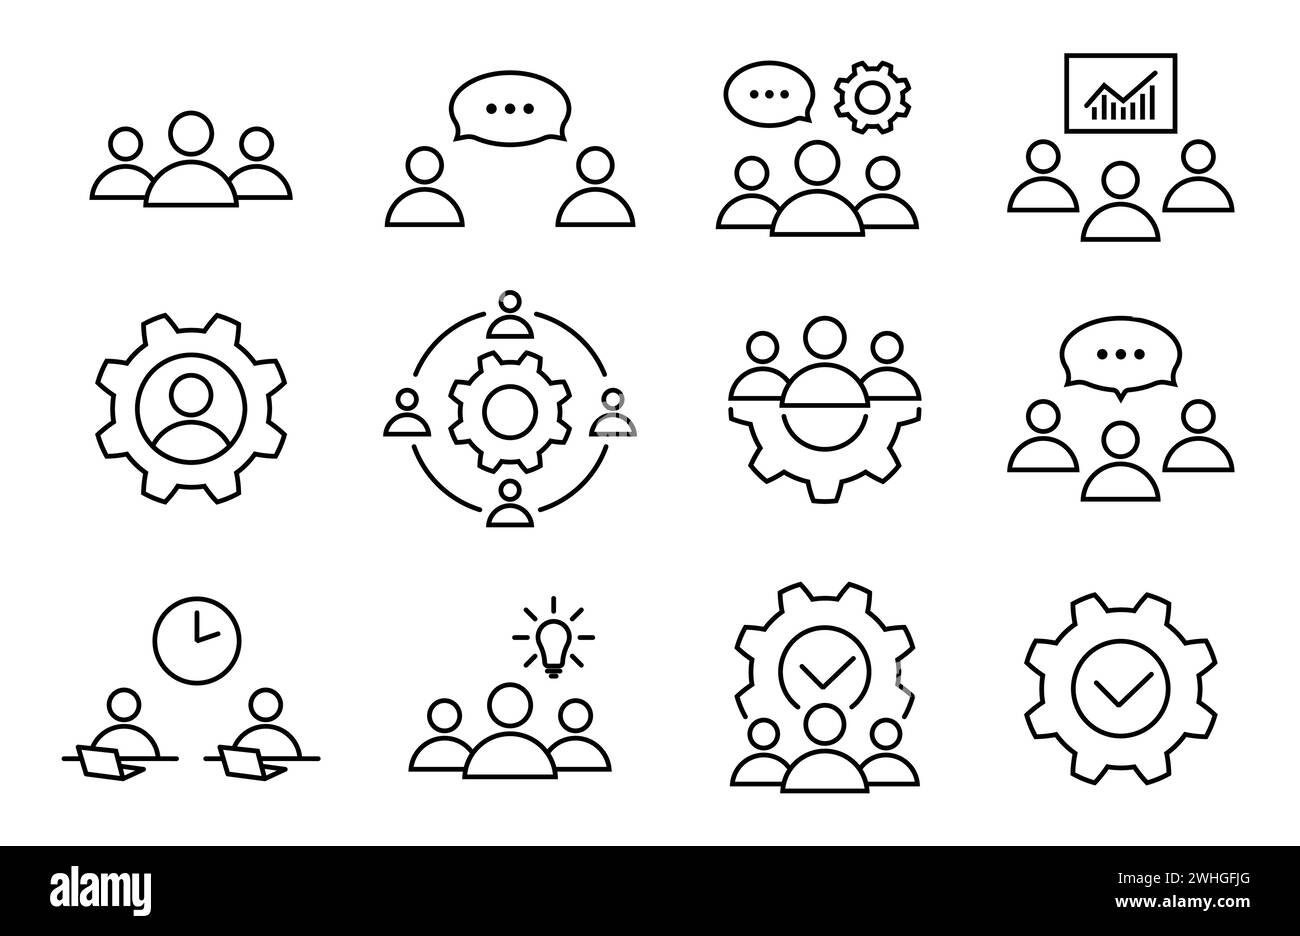 Teamwork process line icon set in flat. Creative, discussion and brainstorming symbols. Talking people and meeting signs. Simple abstract icons. Vecto Stock Vector